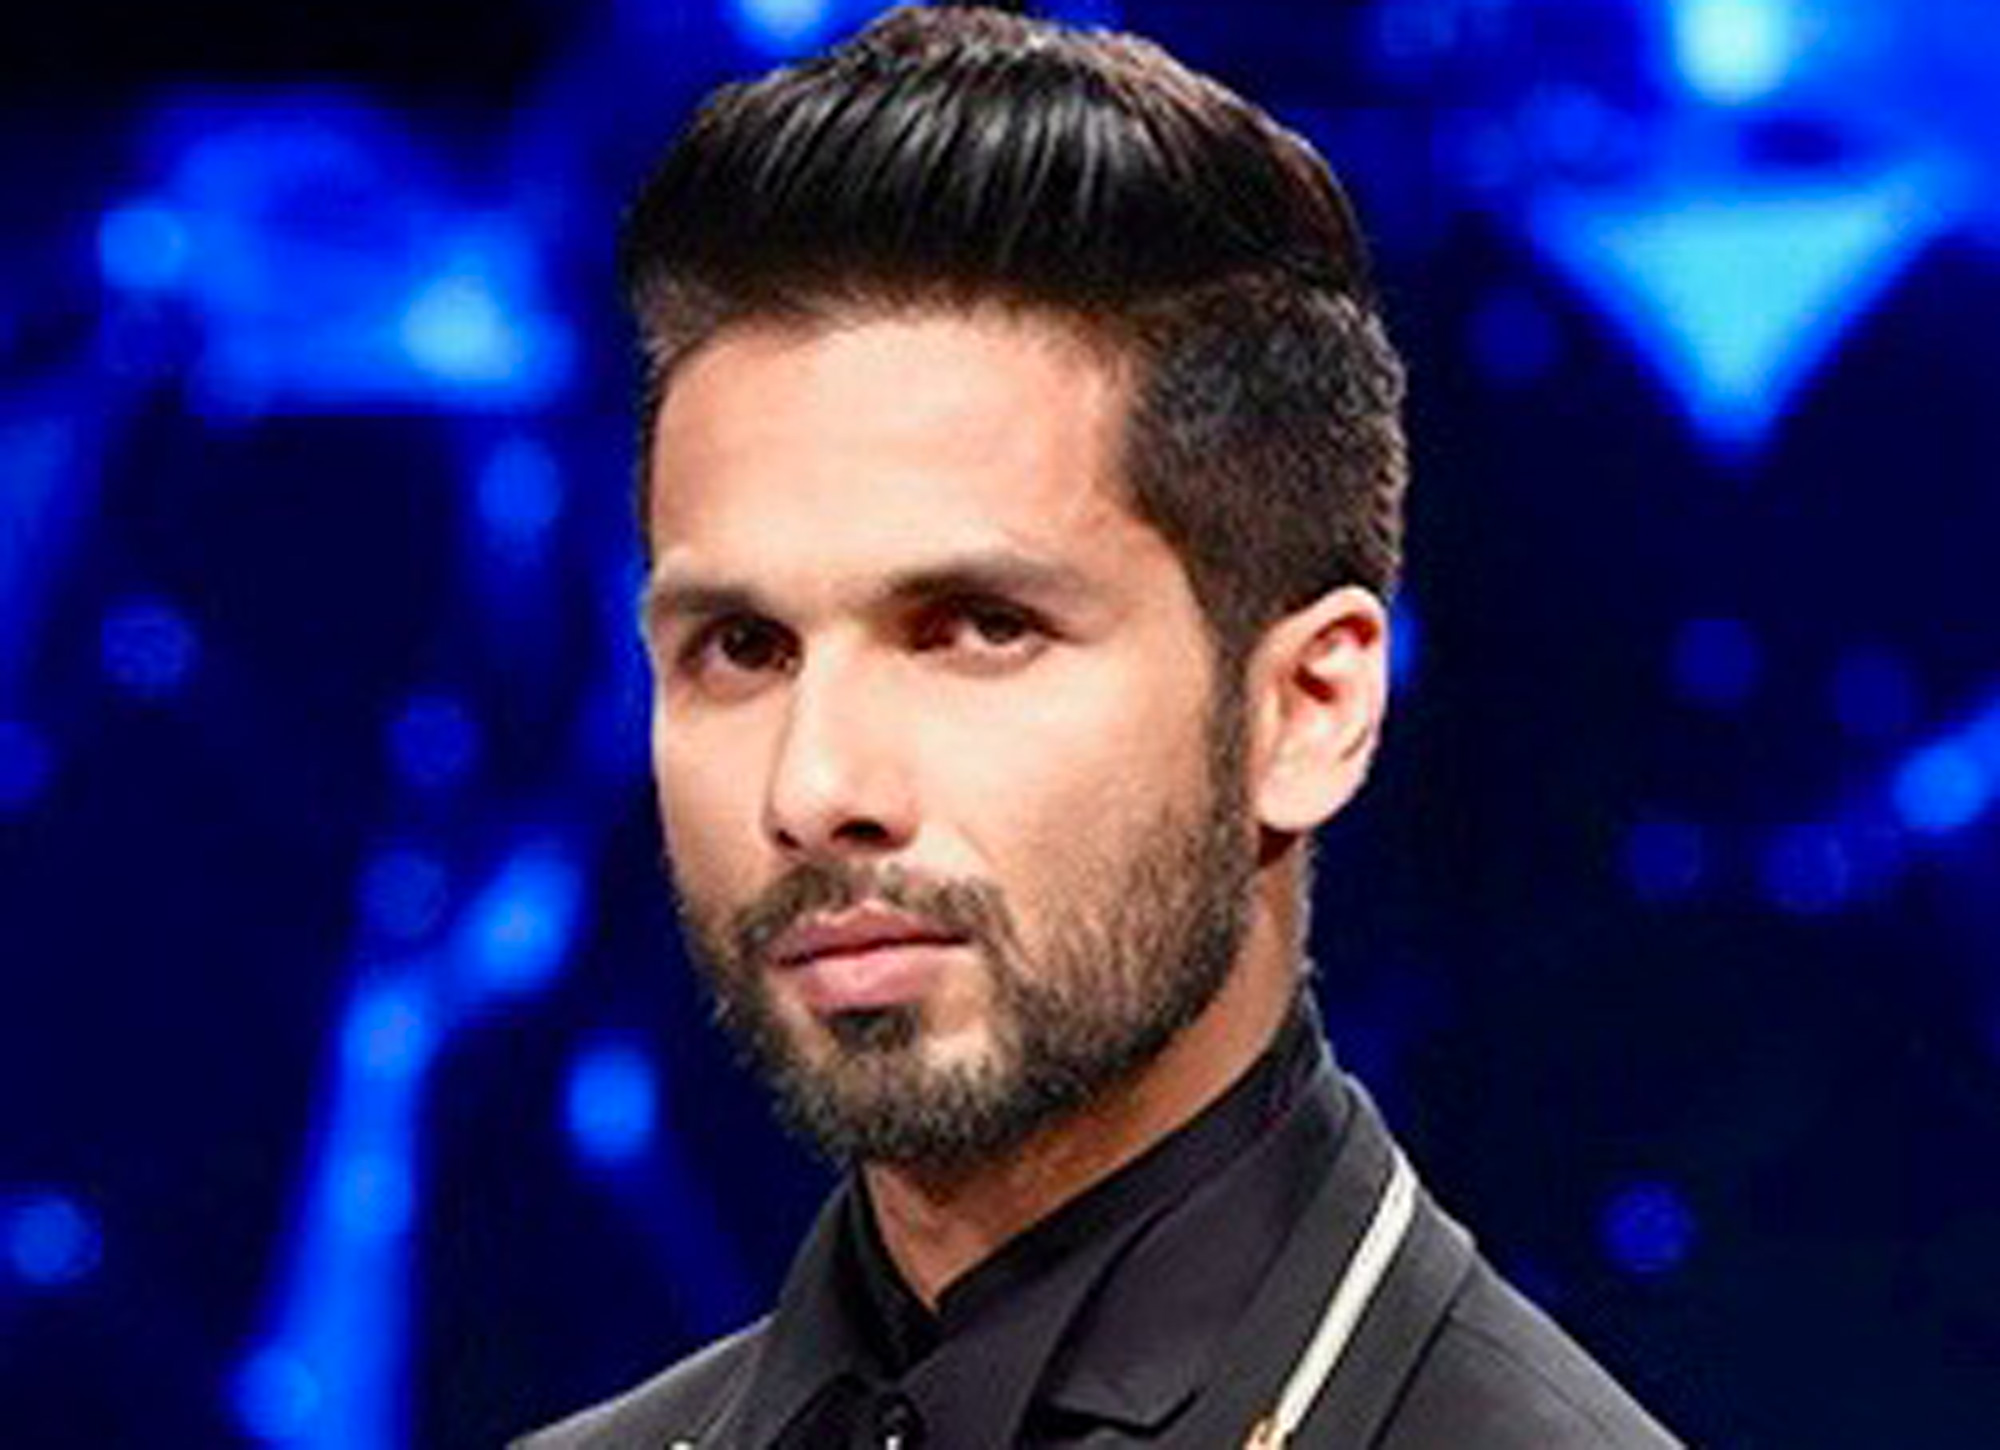 Shahid Kapoor says that he has played the roles of a Punjabi, a Kashmiri and a native of Uttarakhand without facing any criticism